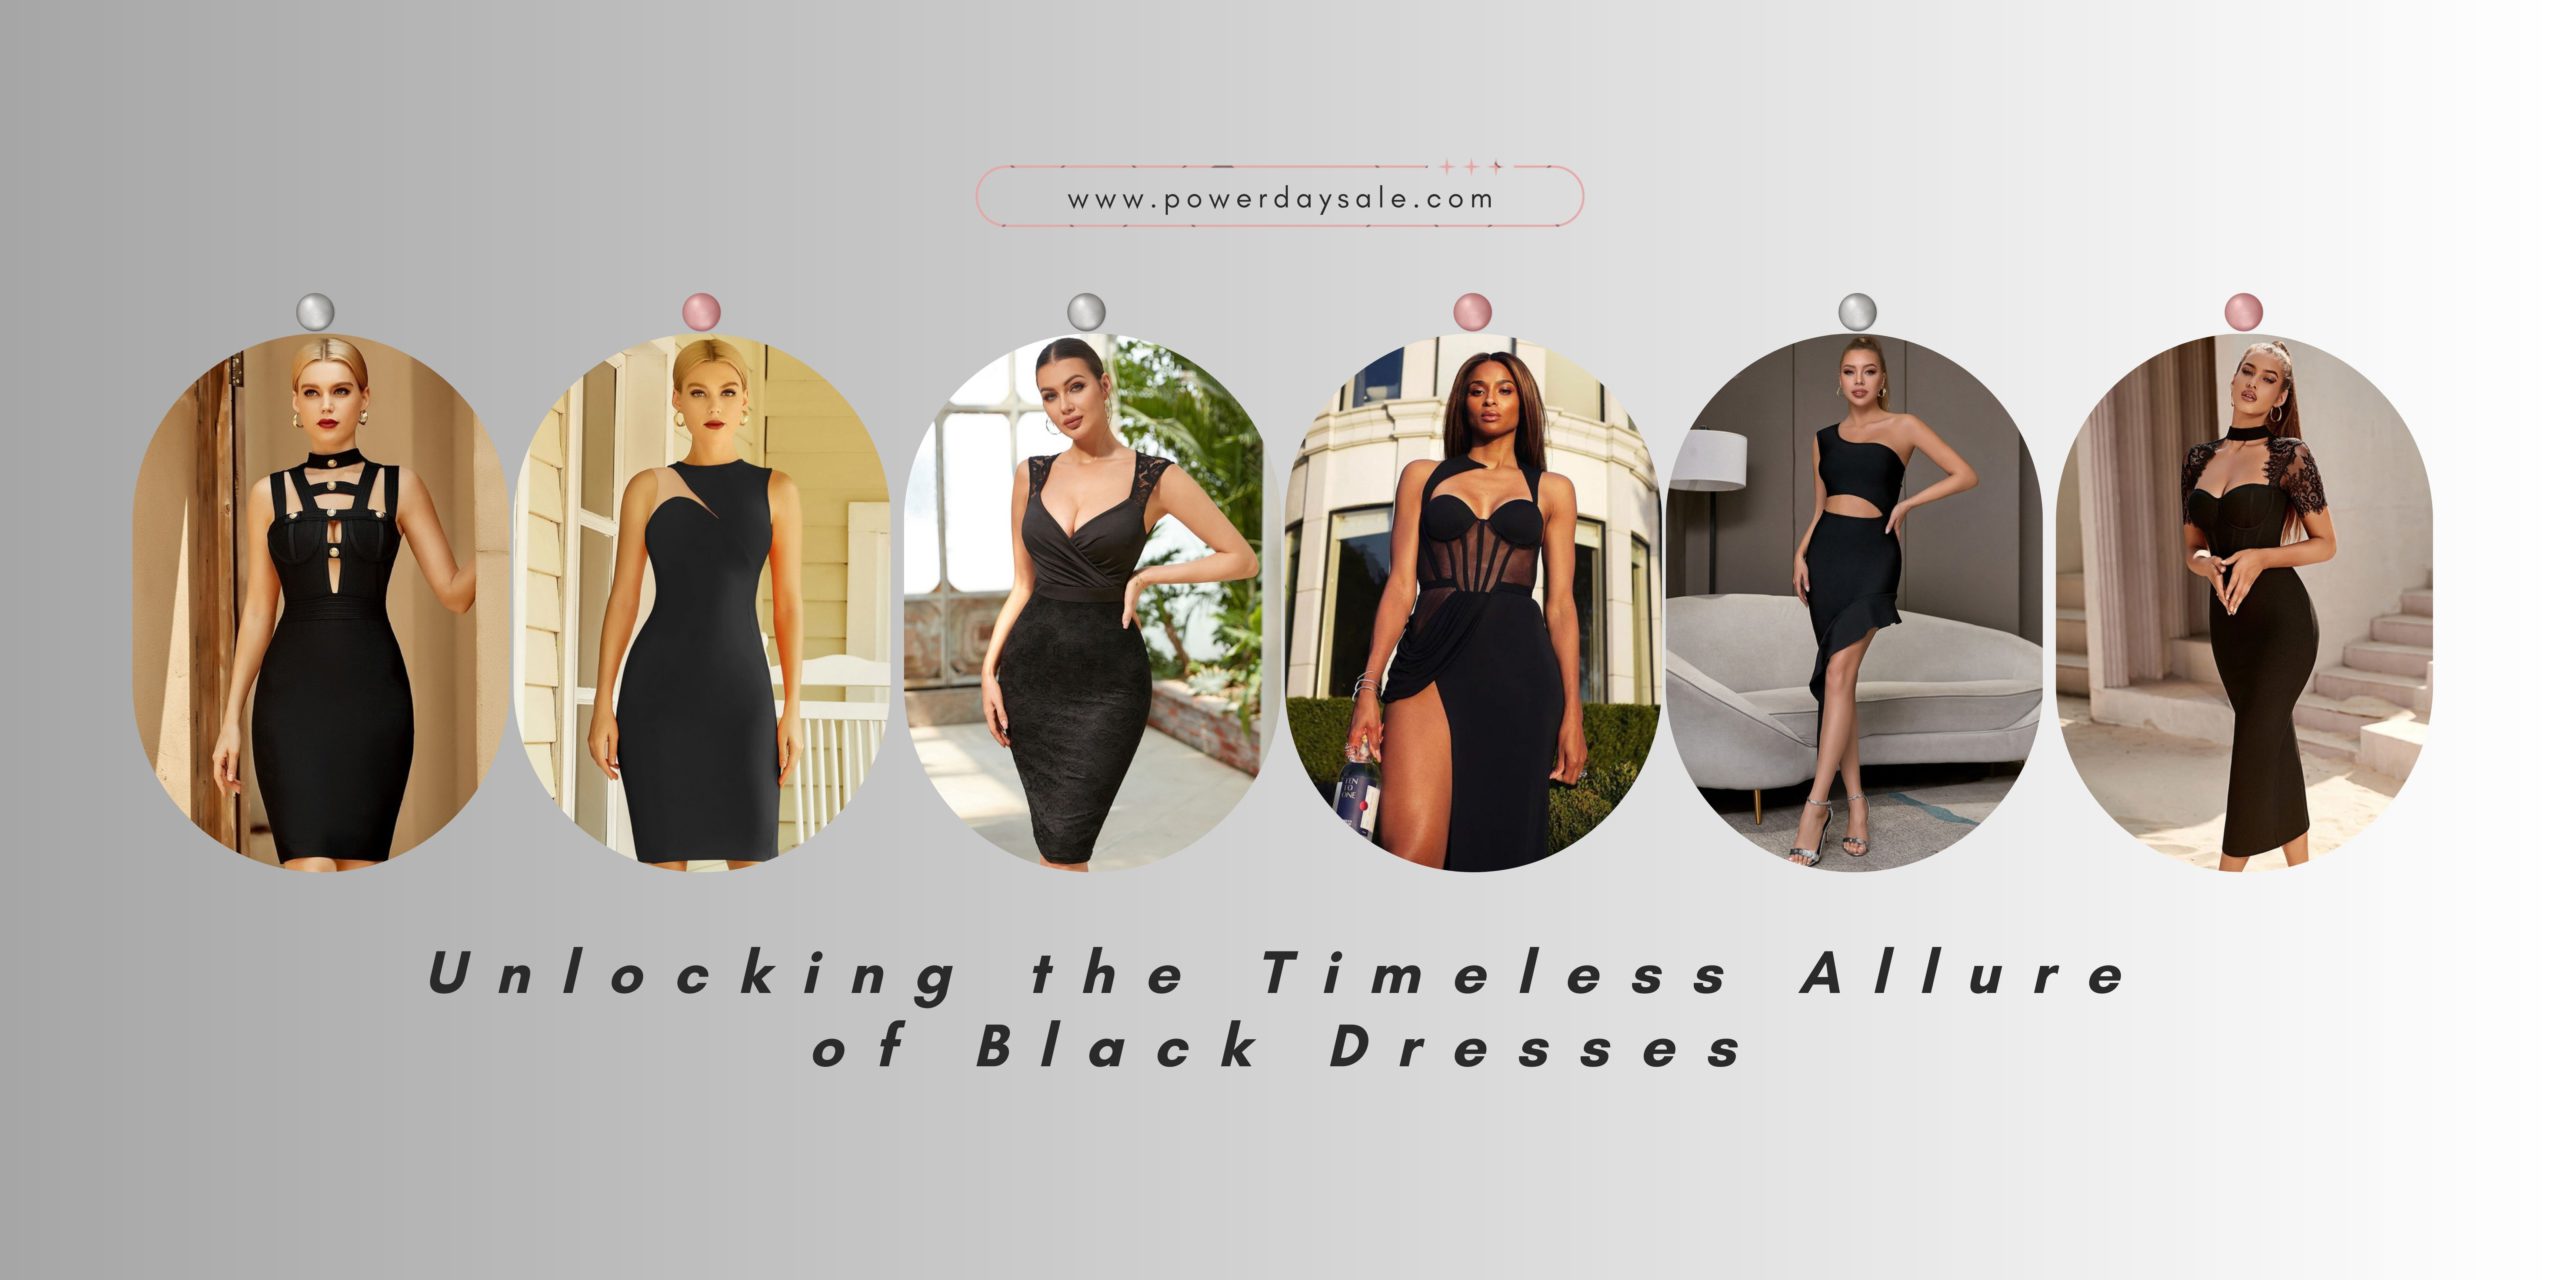 You are currently viewing Unlocking the Timeless Allure of Black Dresses